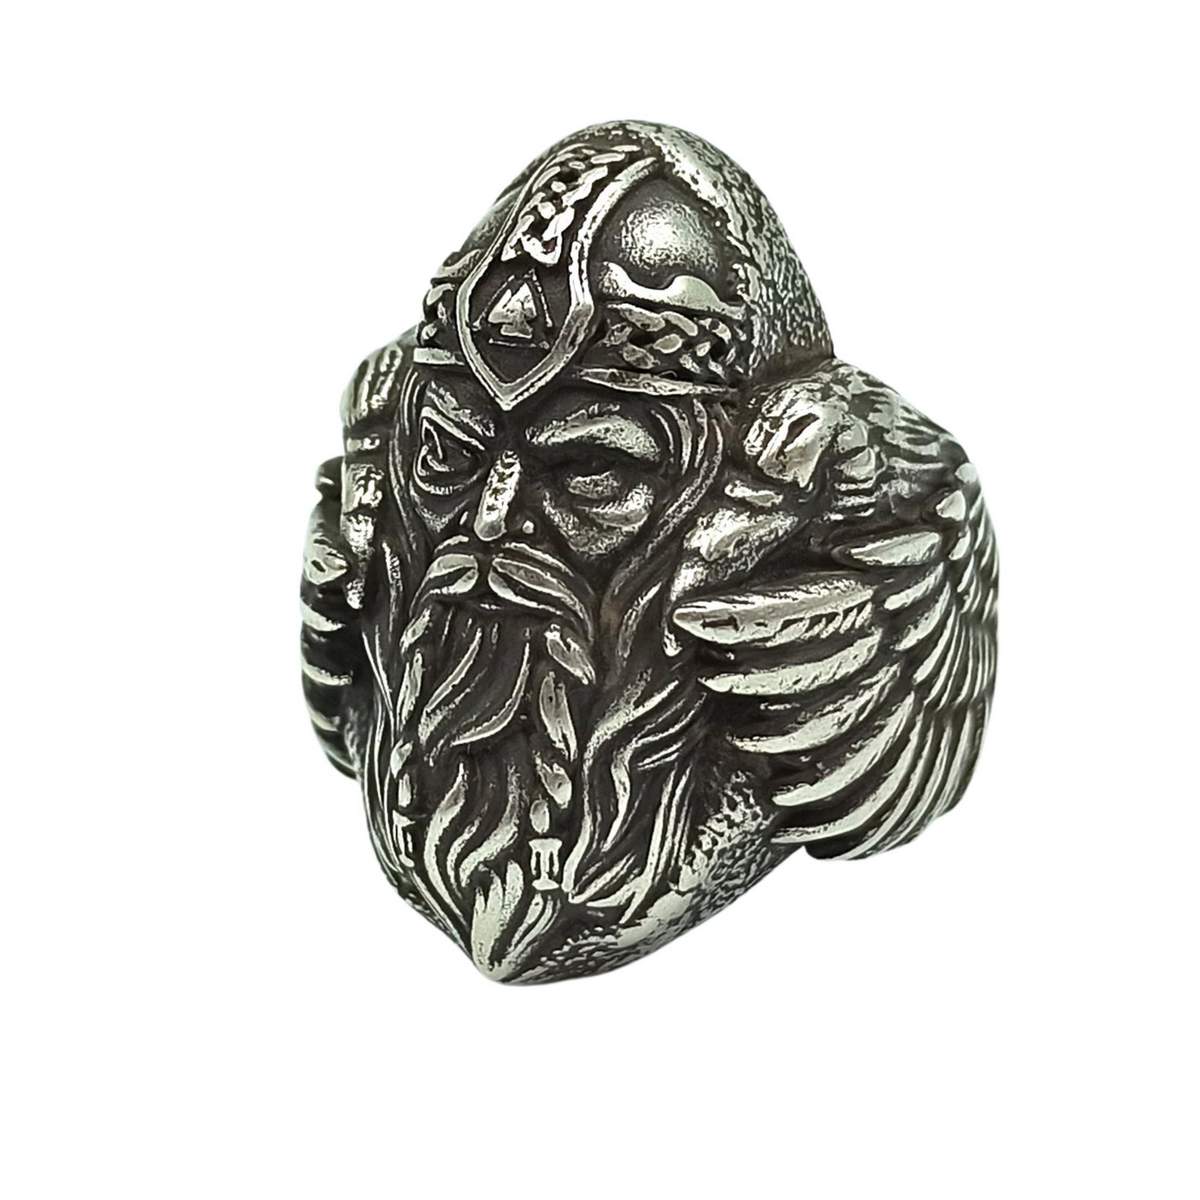 Odin with Ravens Bronze Signet Ring Viking Jewelry 8 1/4 US / Bronze with Patina